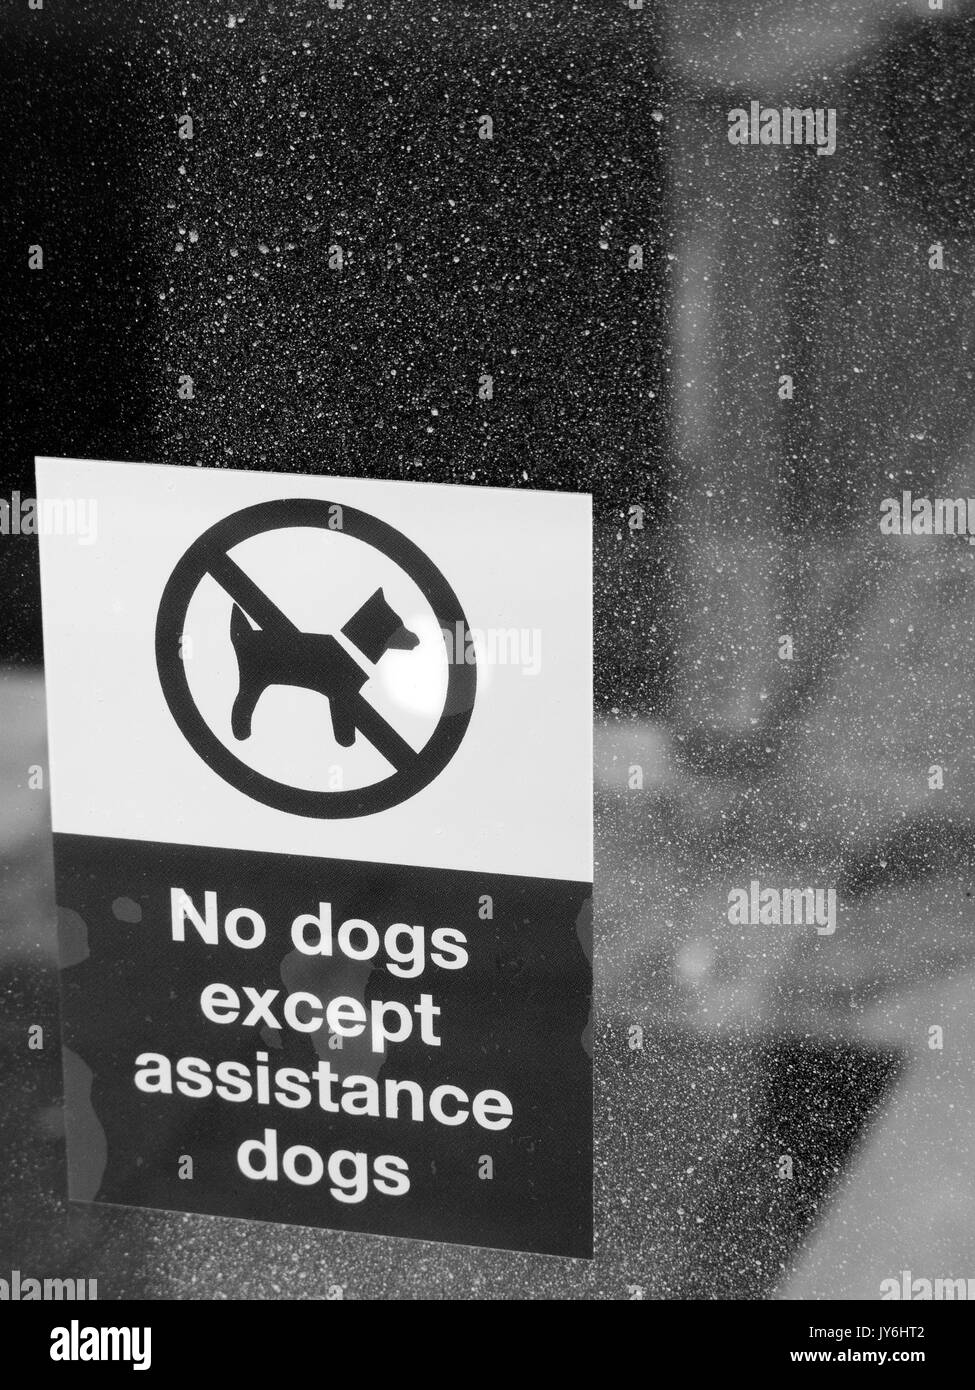 No dogs except assistance dogs sign on dusty vacant retail shop window Stock Photo